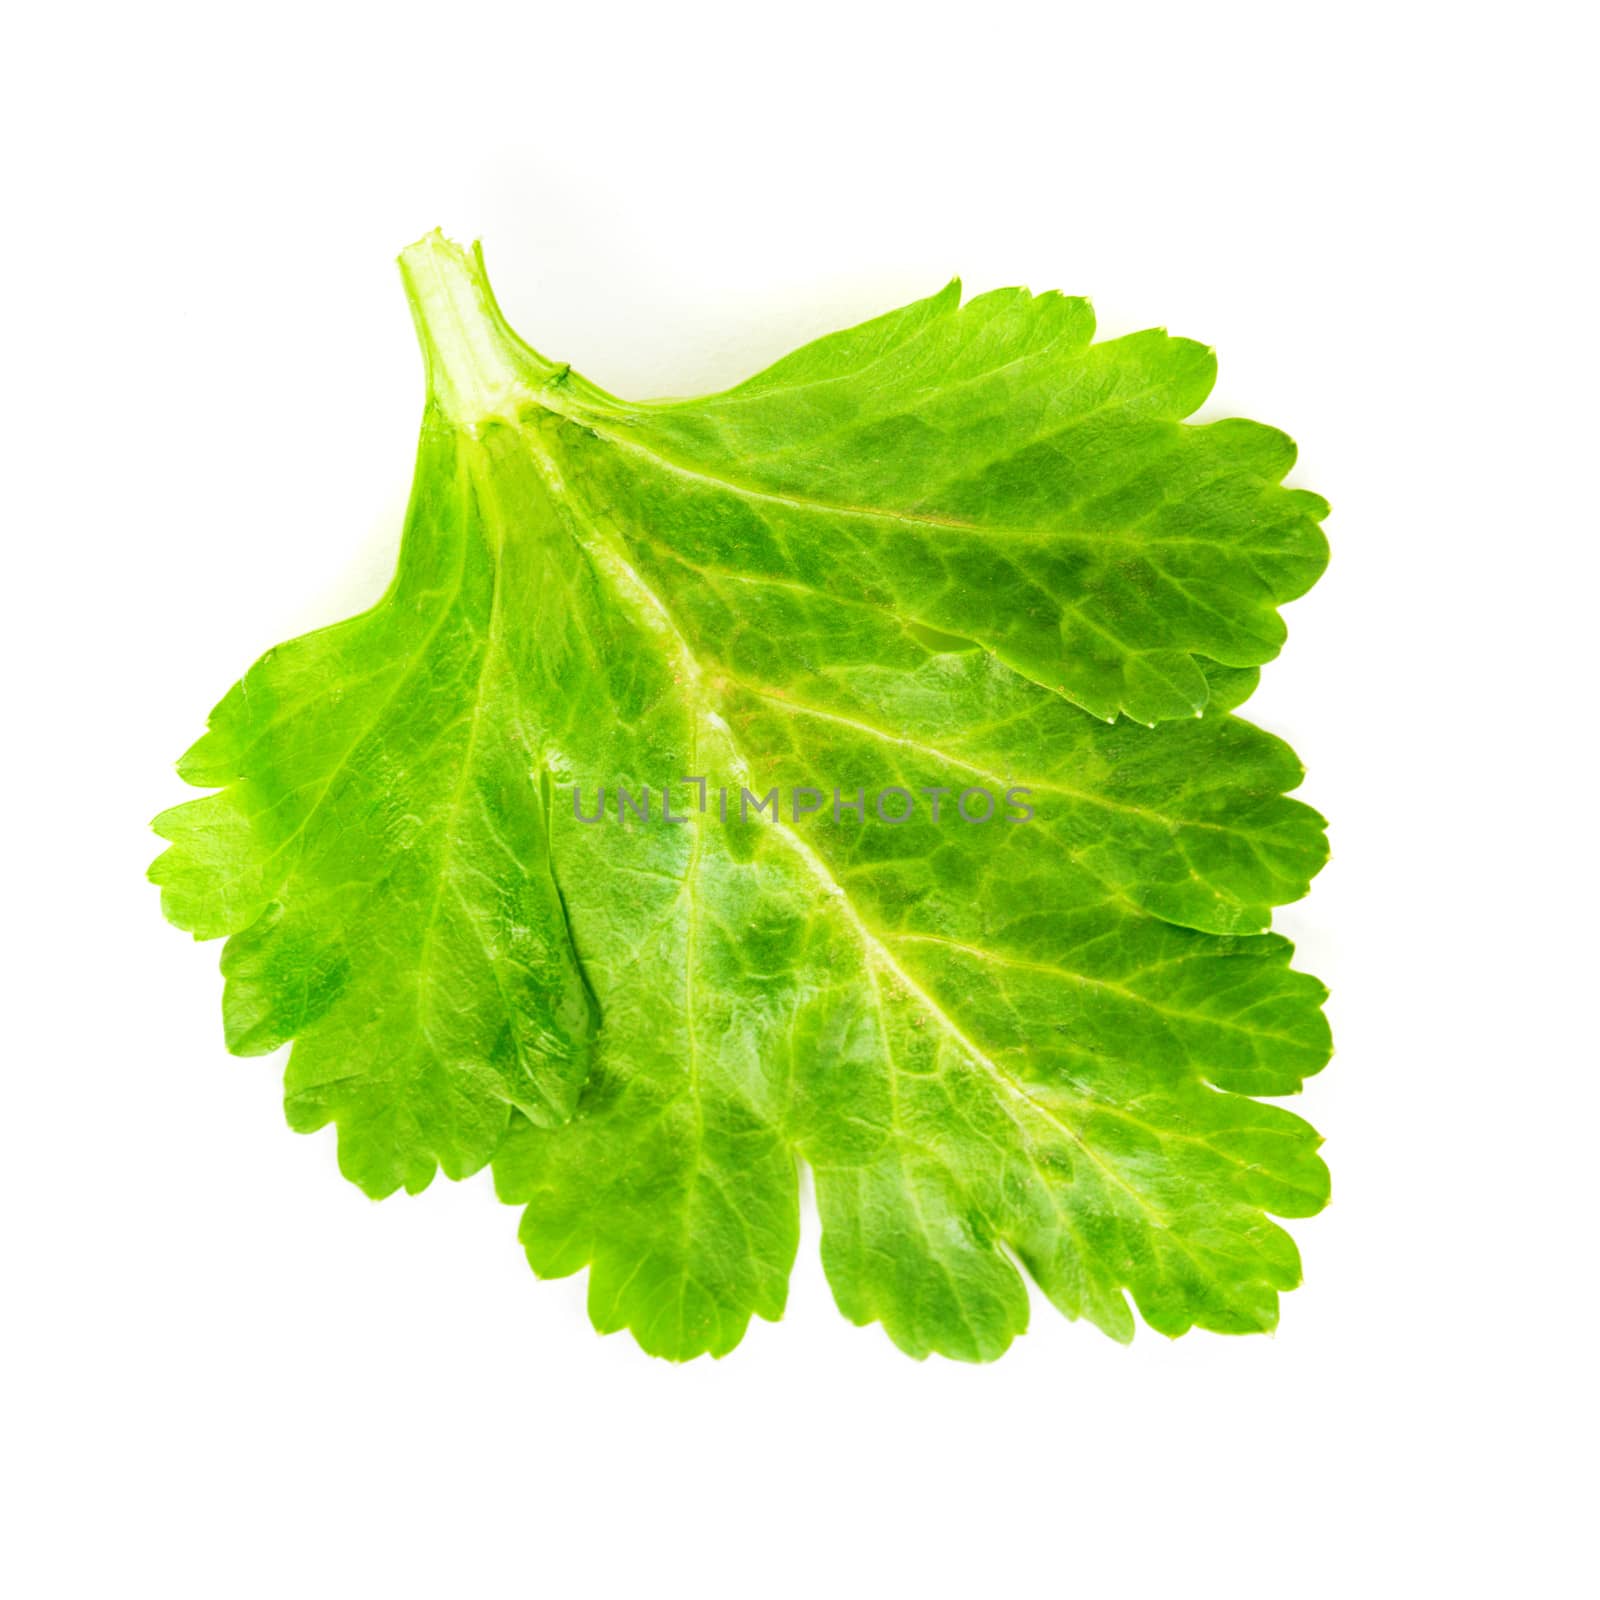 green celery leaf isolated on white